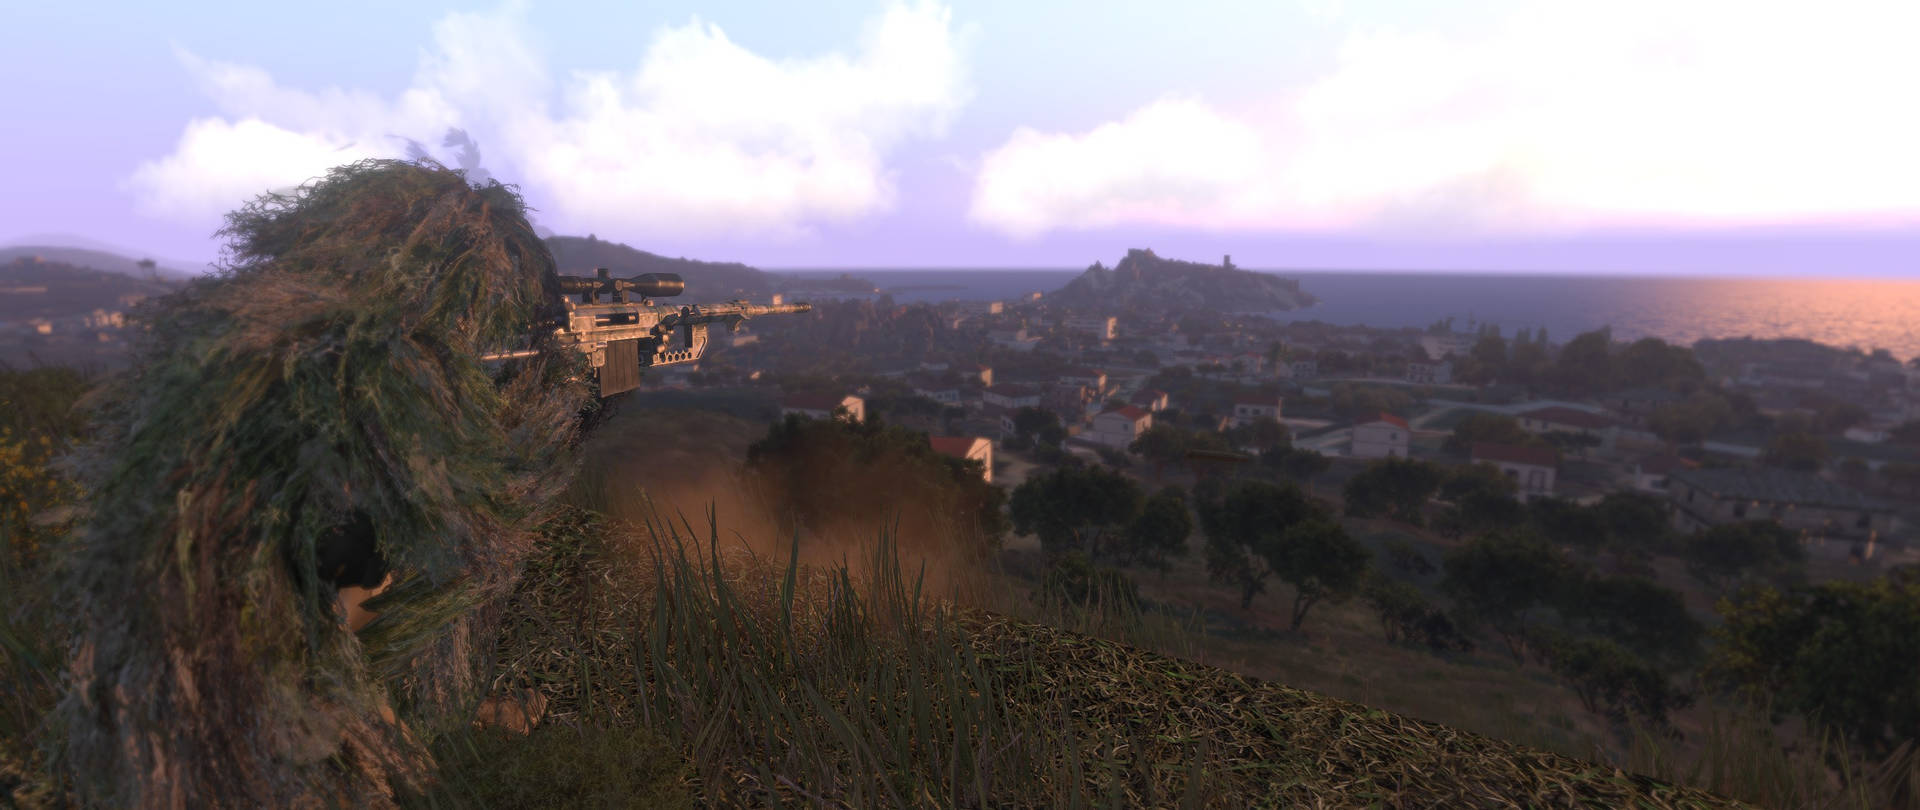 Arma 3 Camouflage Sniper Background